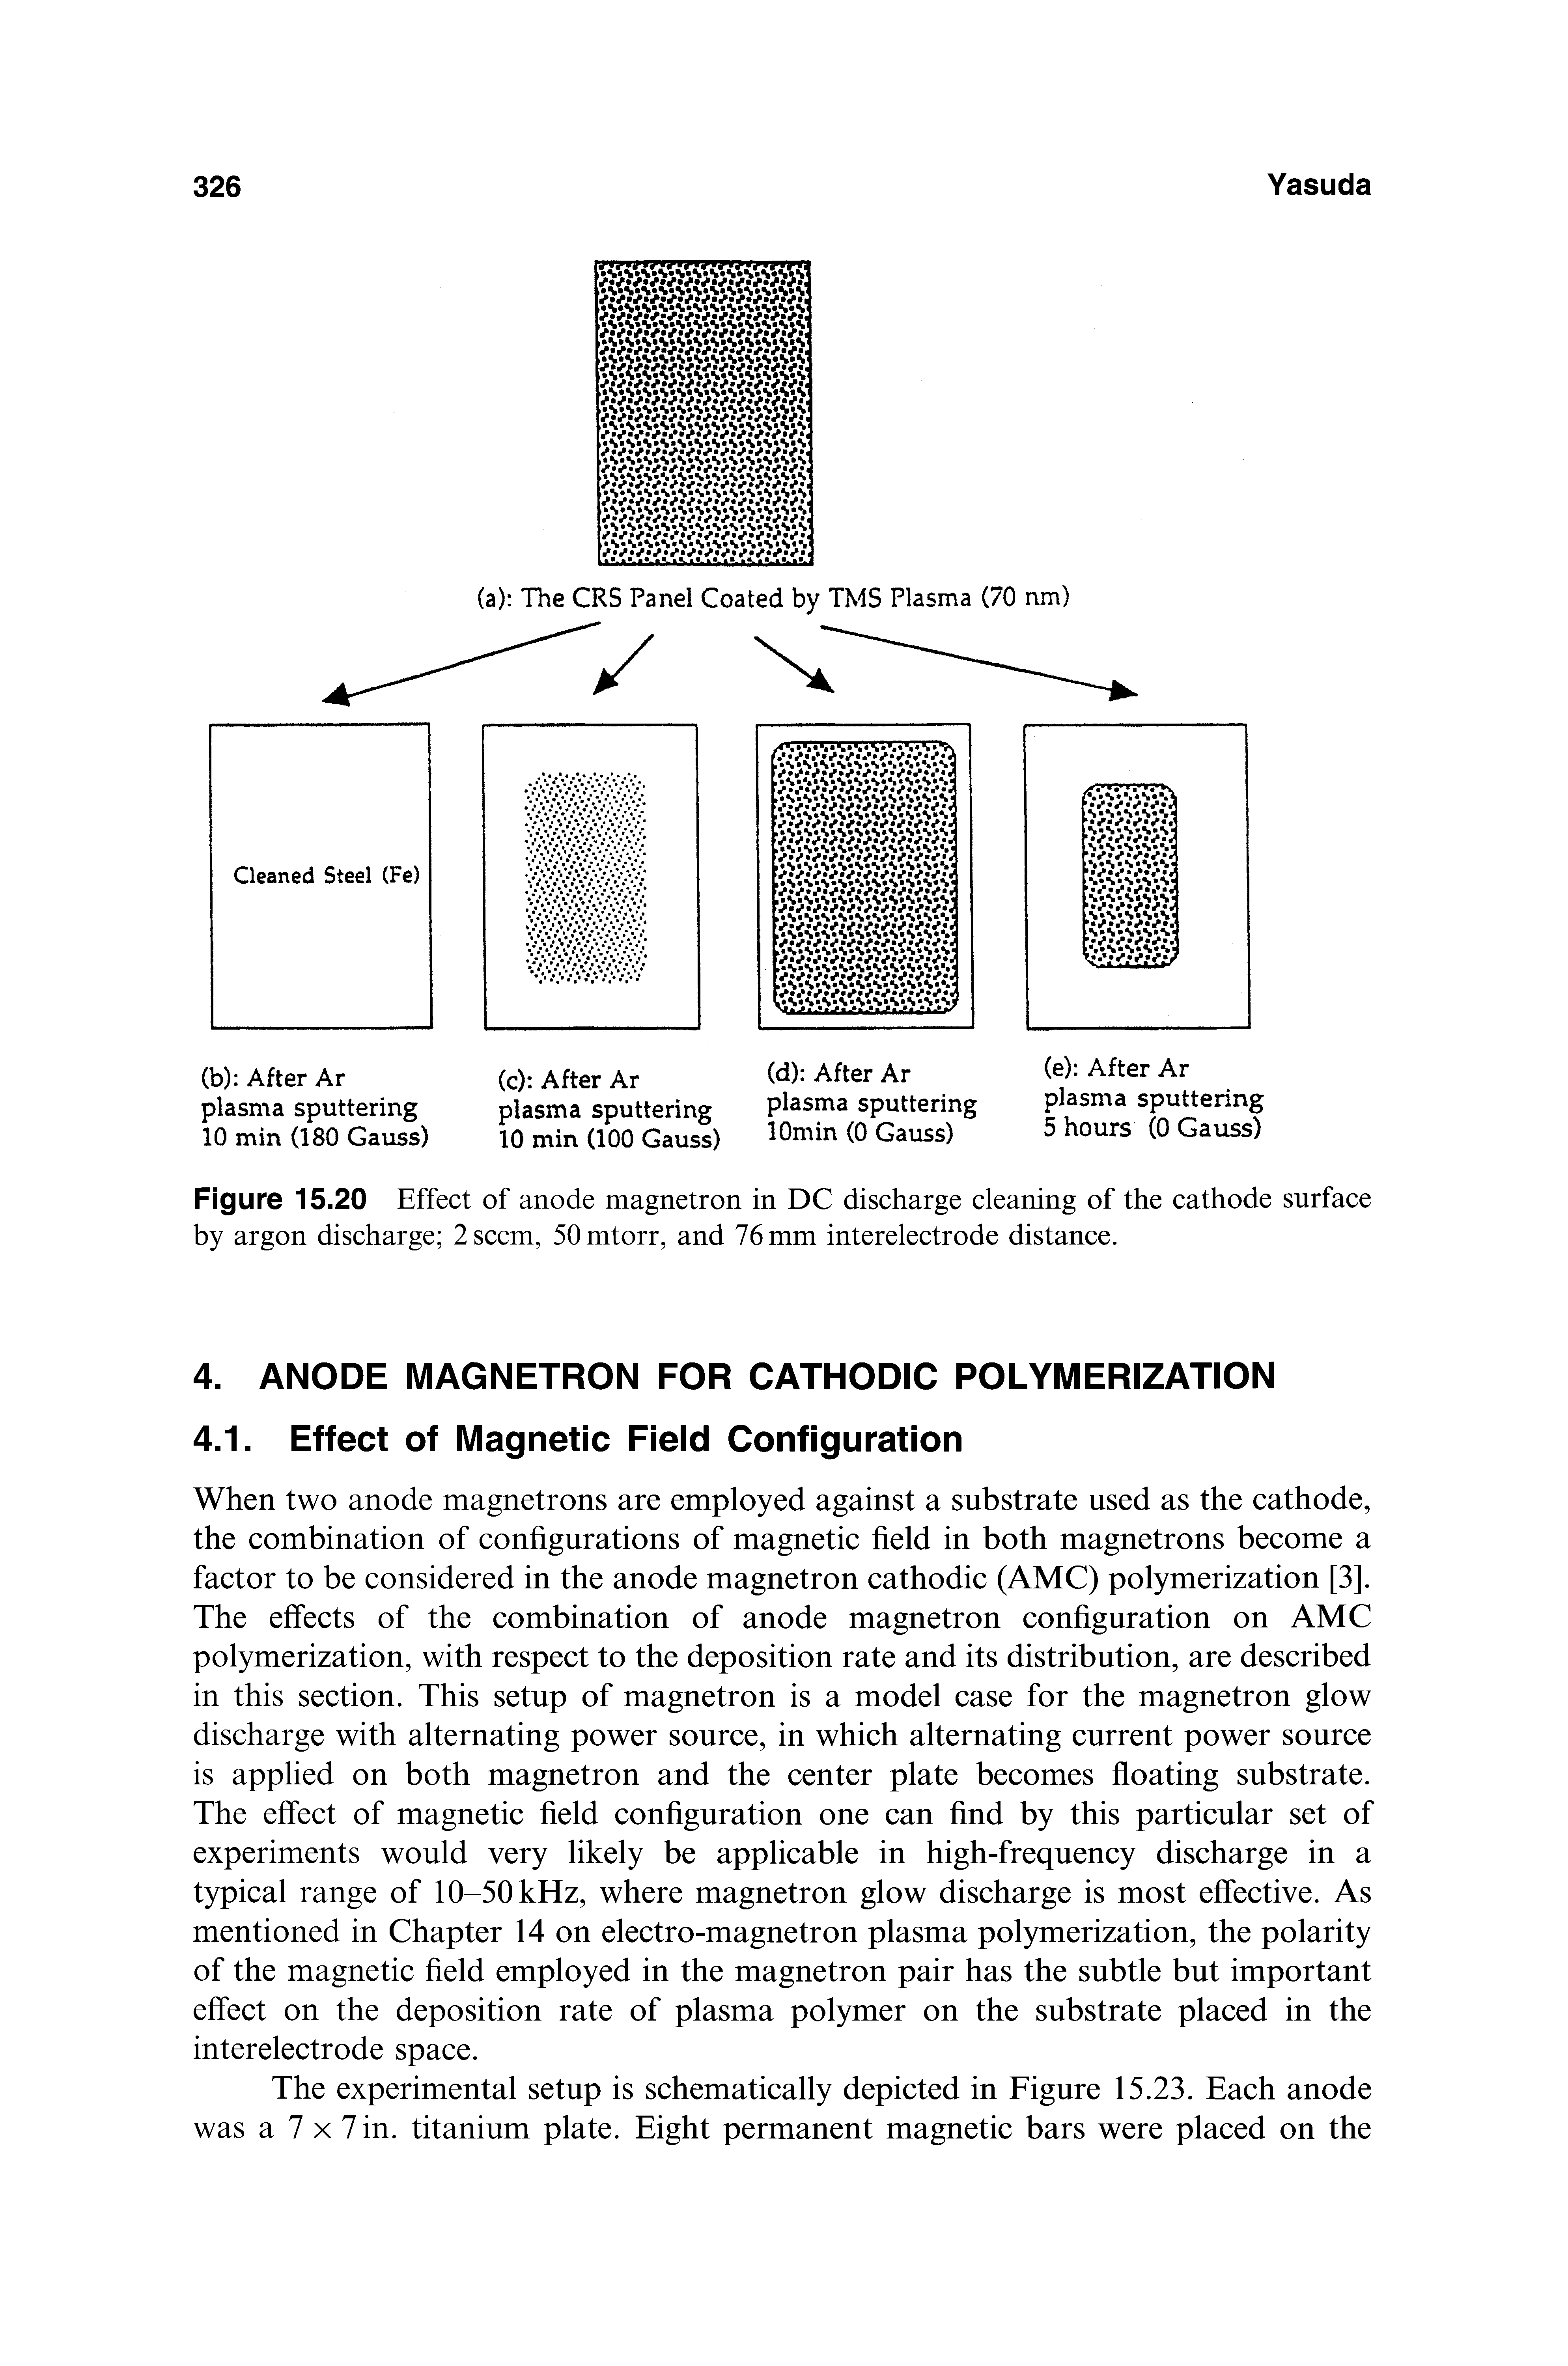 Figure 15.20 Effect of anode magnetron in DC discharge cleaning of the cathode surface by argon discharge 2 seem, SOmtorr, and 76 mm interelectrode distance.